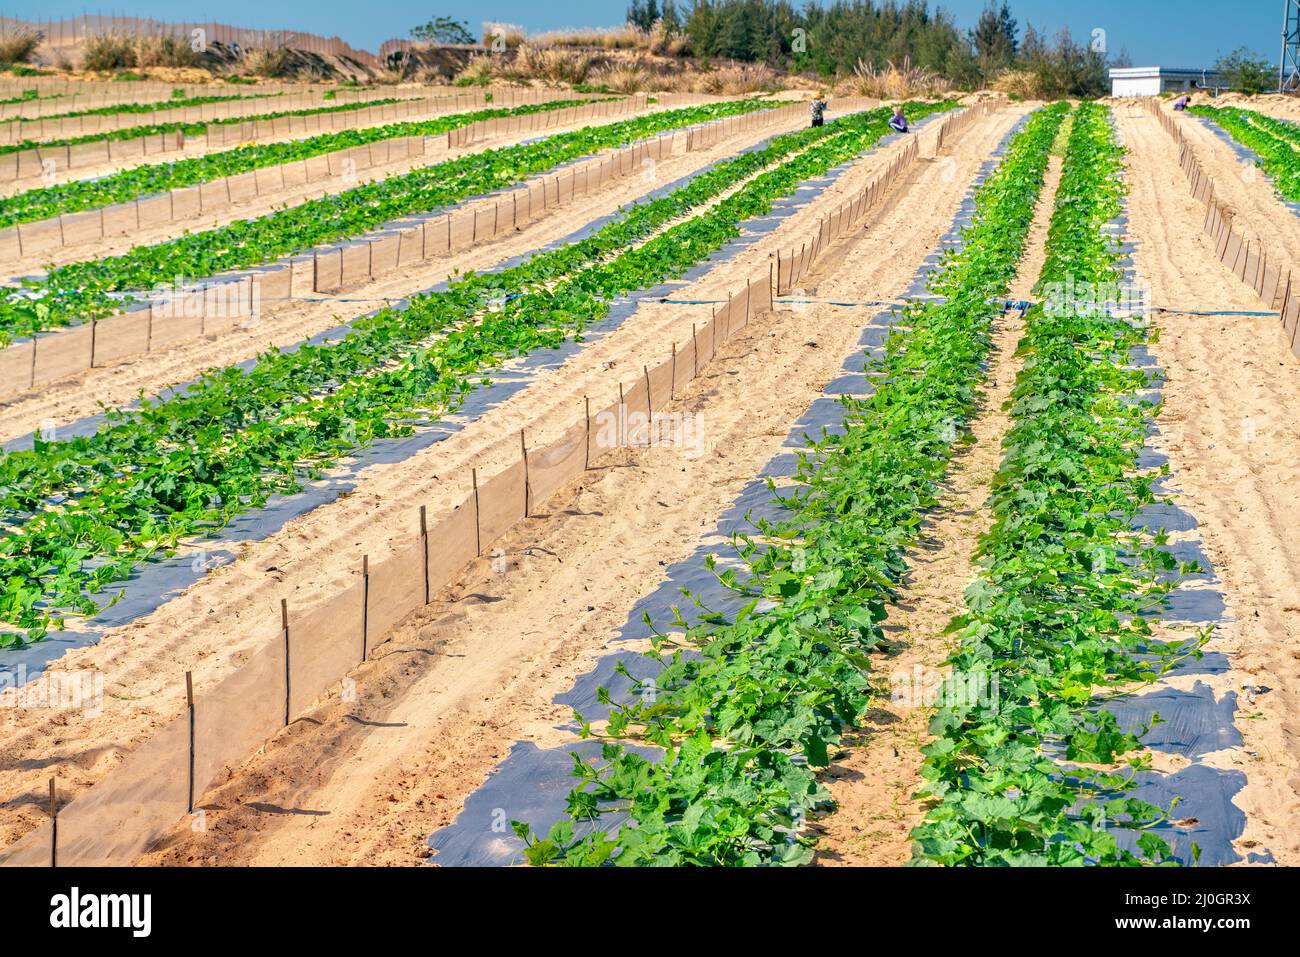 The view of watermelon plantation inside the desert Stock Photo